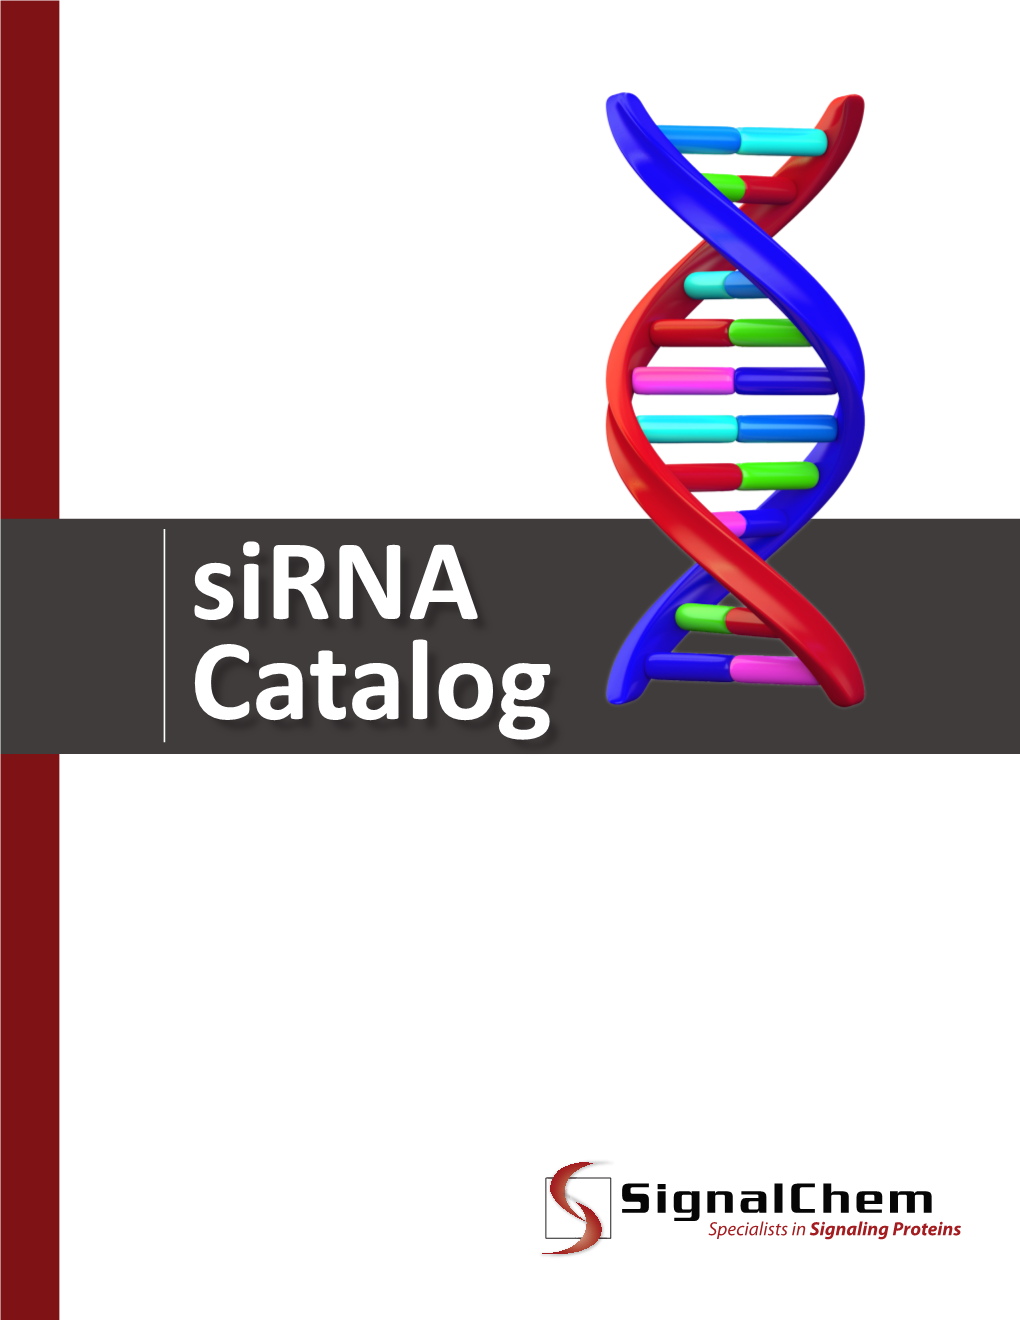 Sirnas) Are Typically Used in Mammalian Cells and Since Sirnas Are Downstream Mediators of Rnai, the Same Desired Targeted Gene Silencing Is Achieved